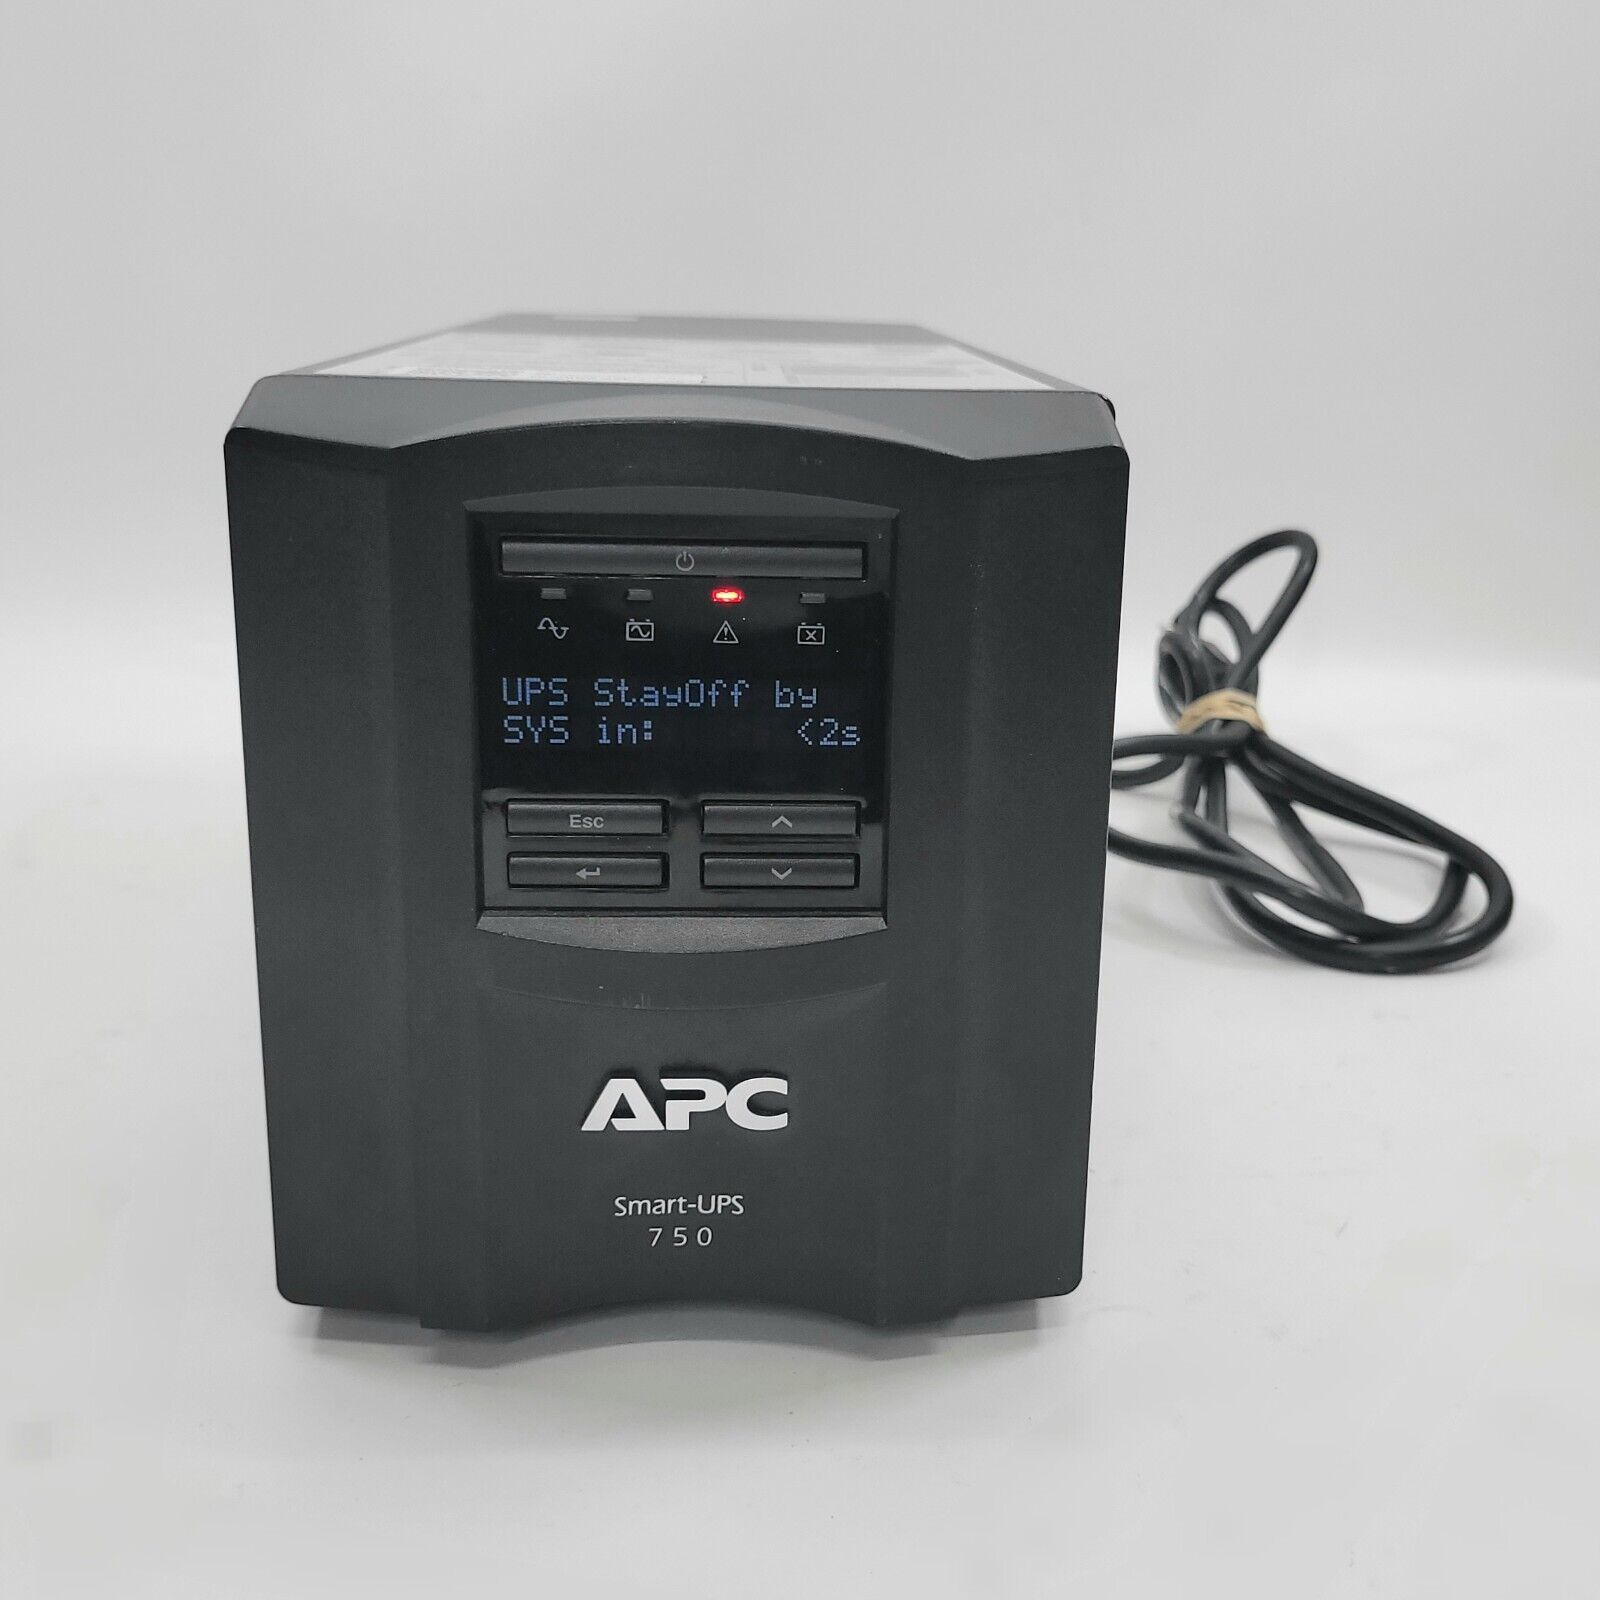 APC Smart-UPS 750 Series SMT750C Battery Backup | Output Watts 500W - As Is